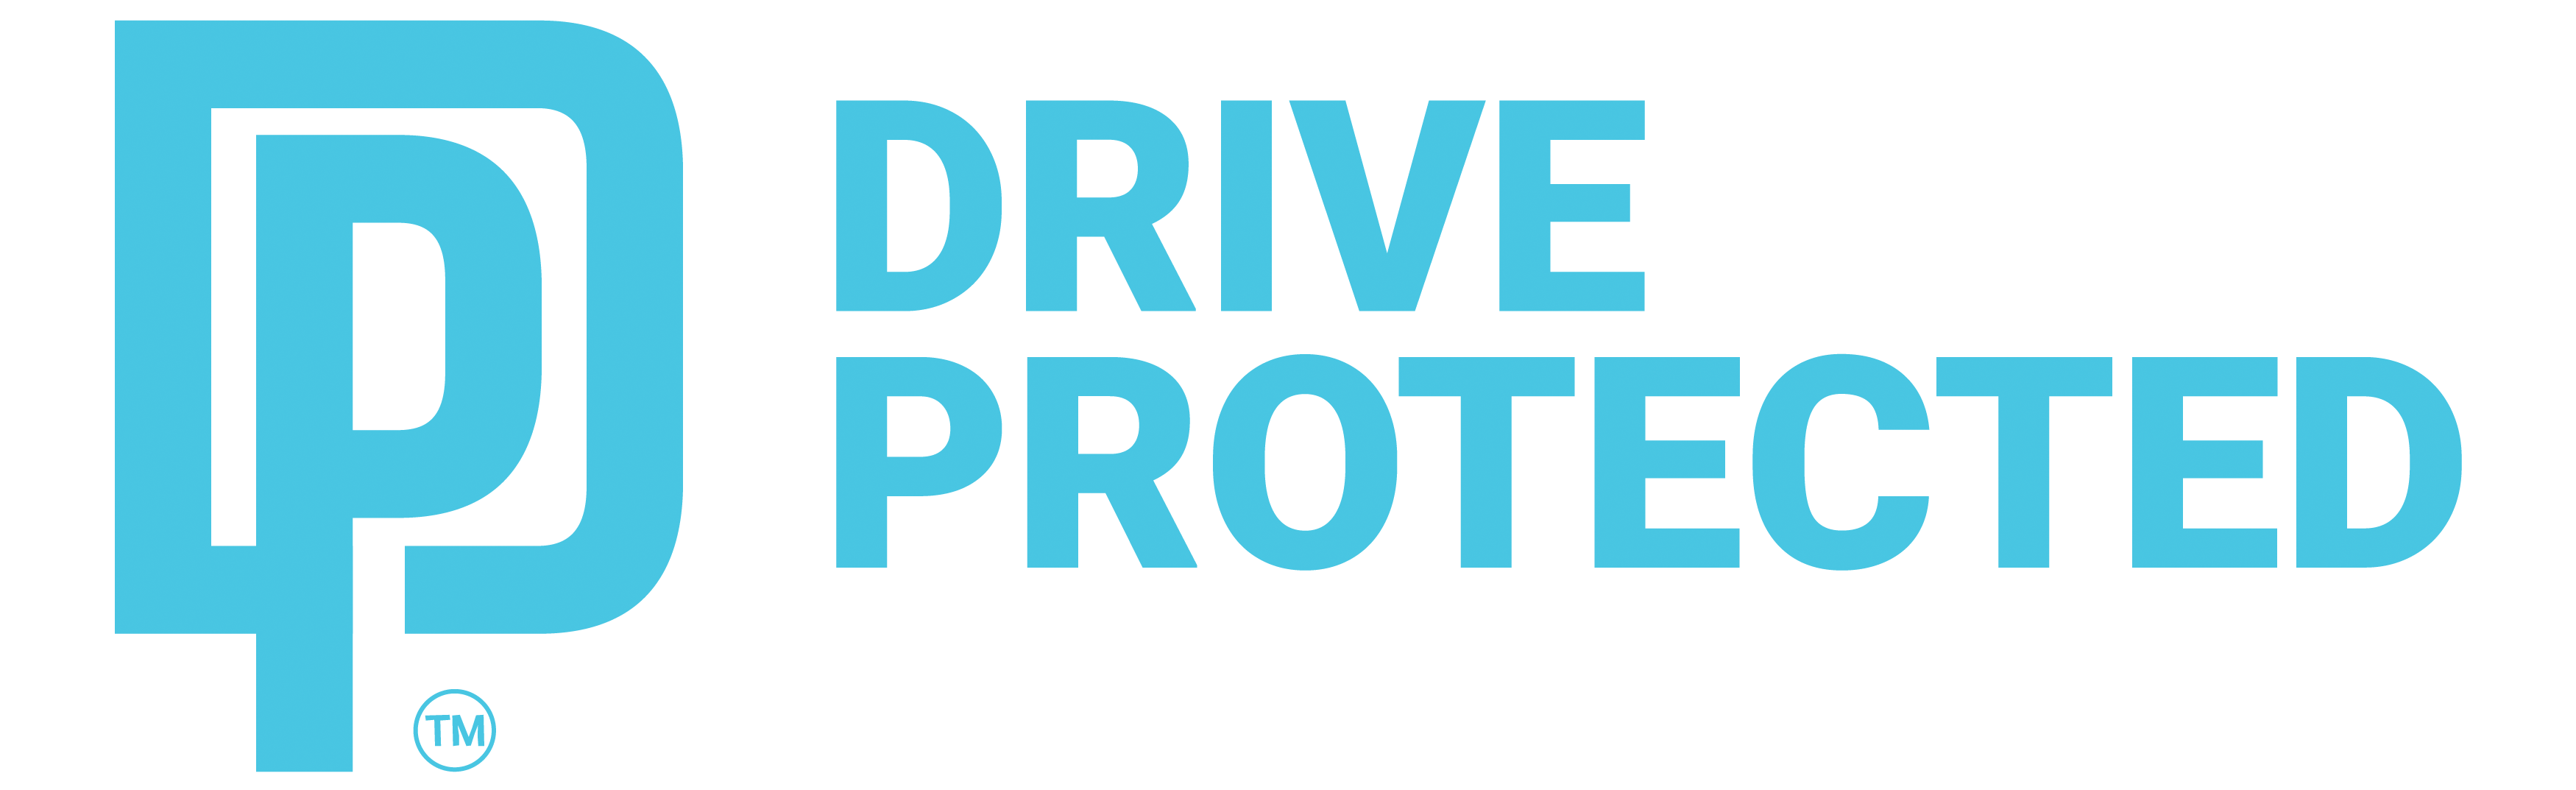 driveprotected.shop